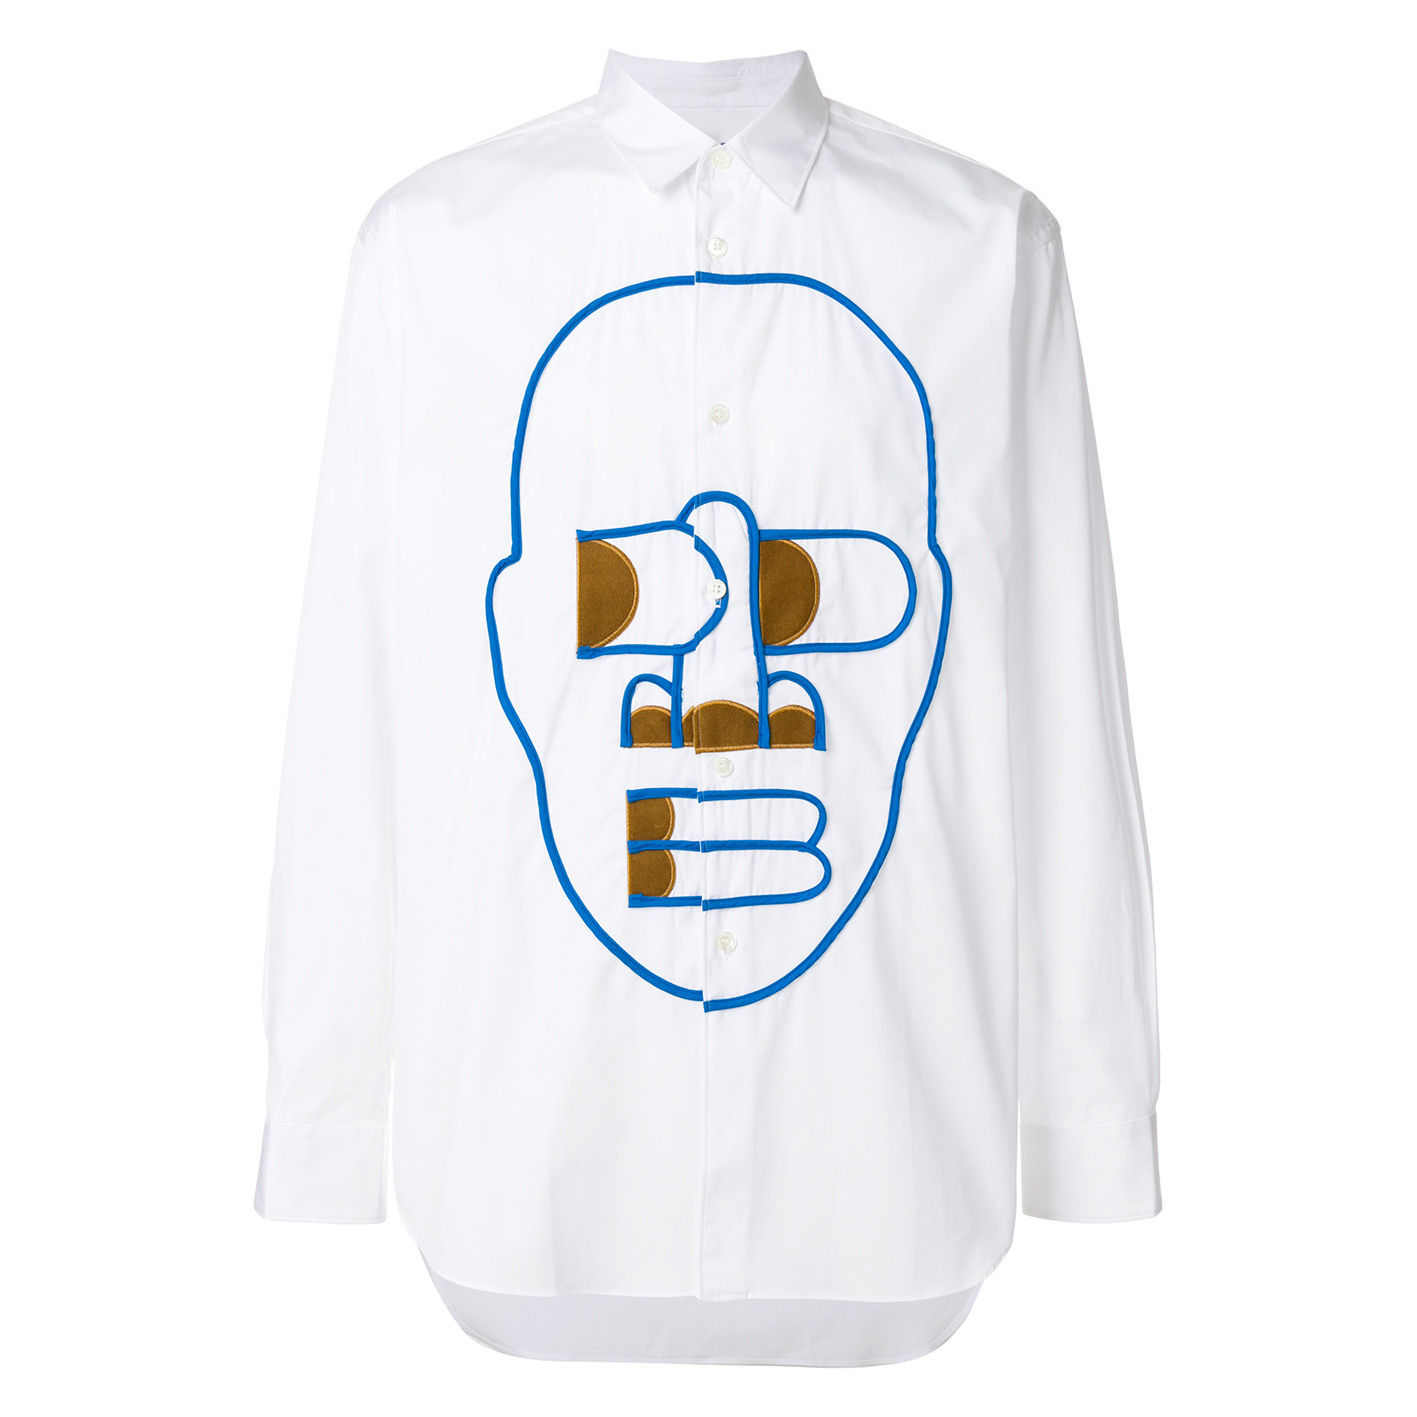 Commes des Garcons face embroidered shirt